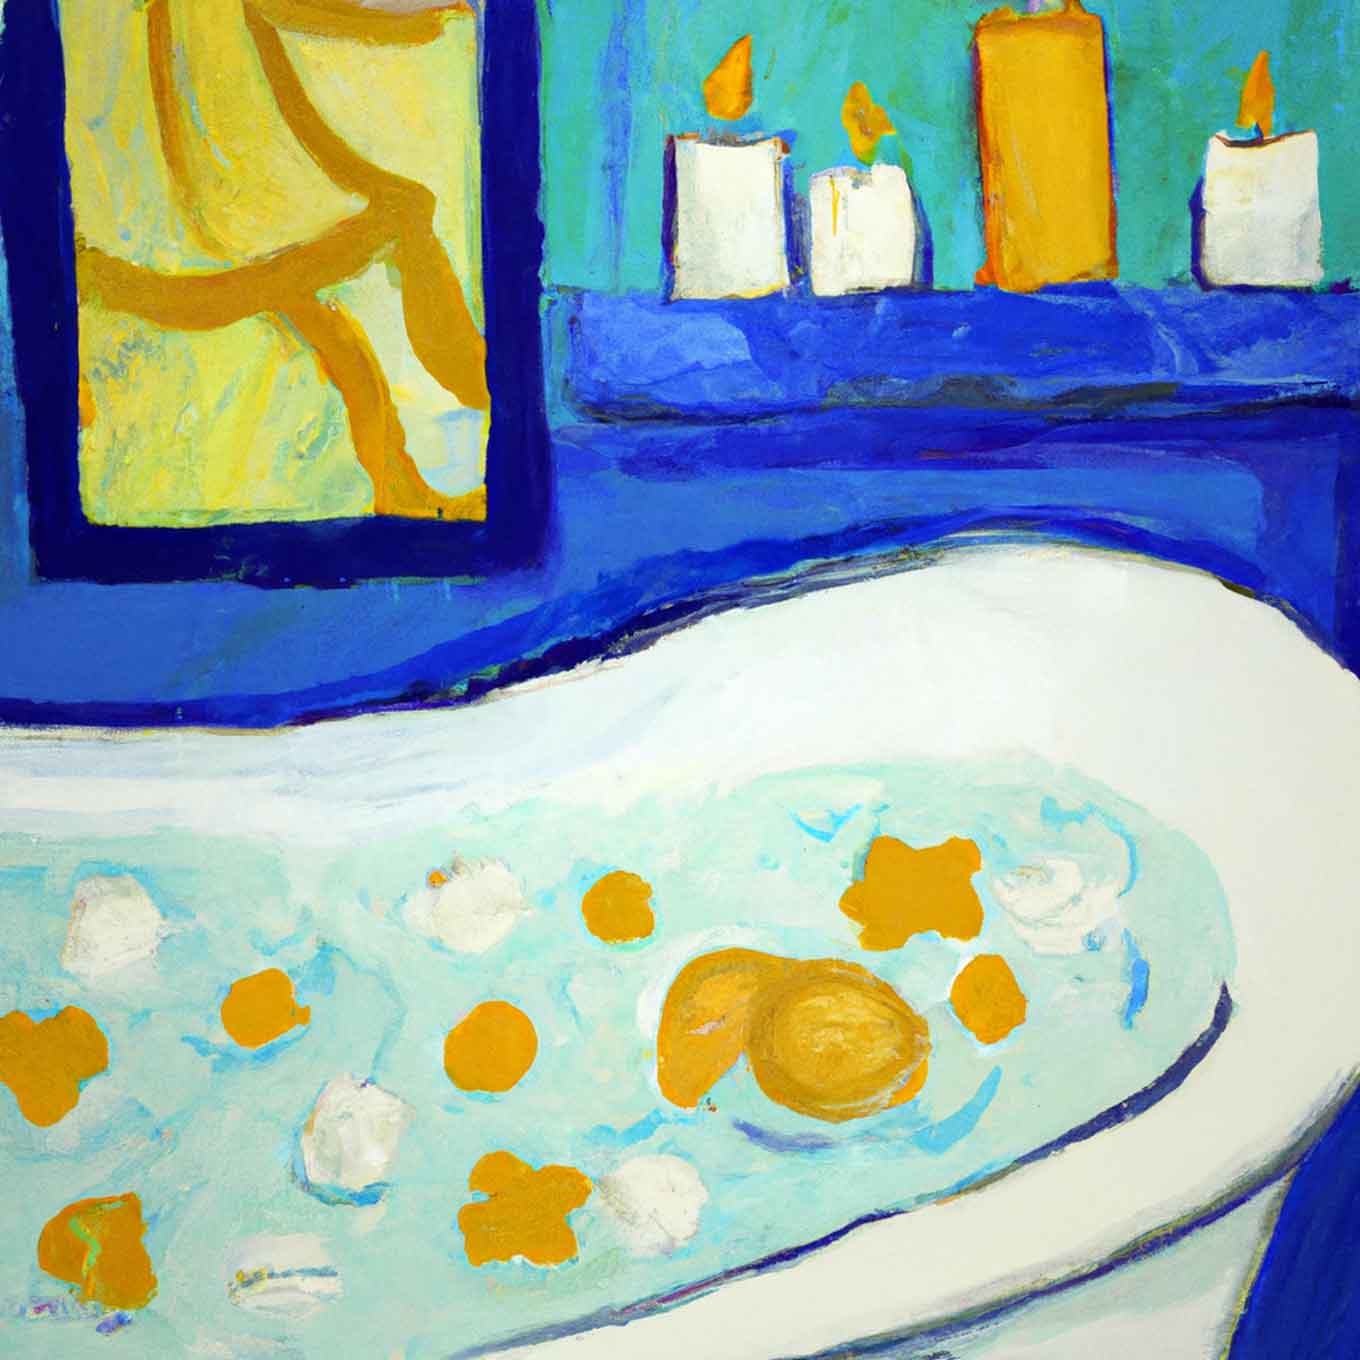 Abstract oil painting of a bubble bath and candles